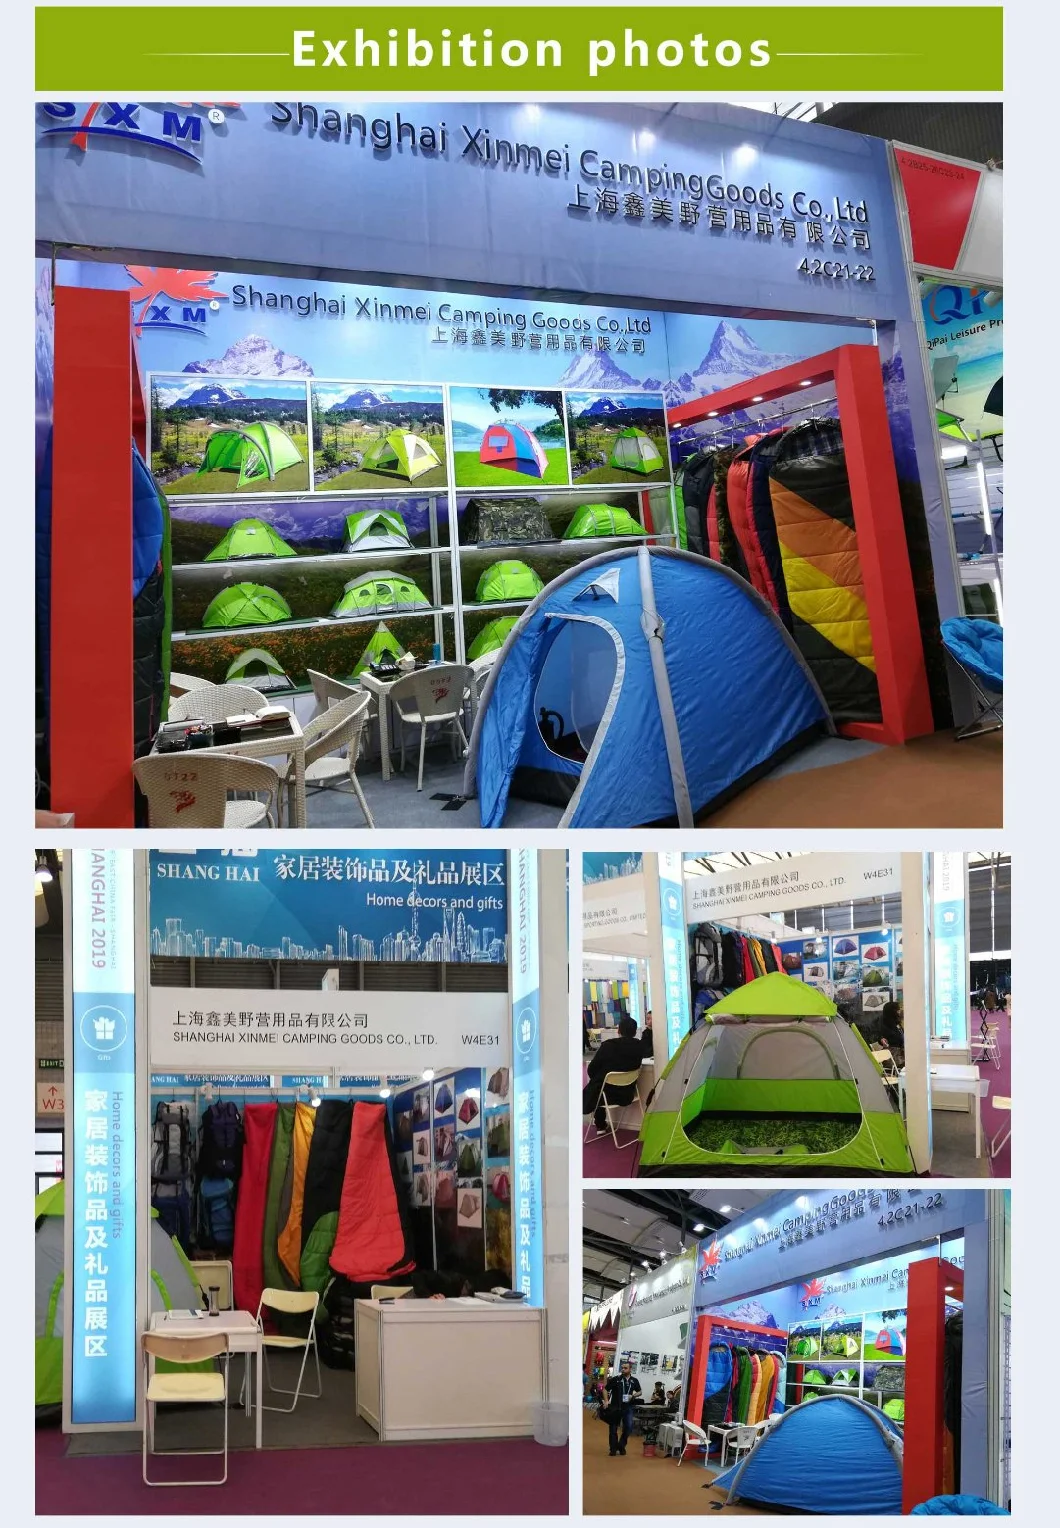 Quick Tent, Foldable Tent, Camping Tent